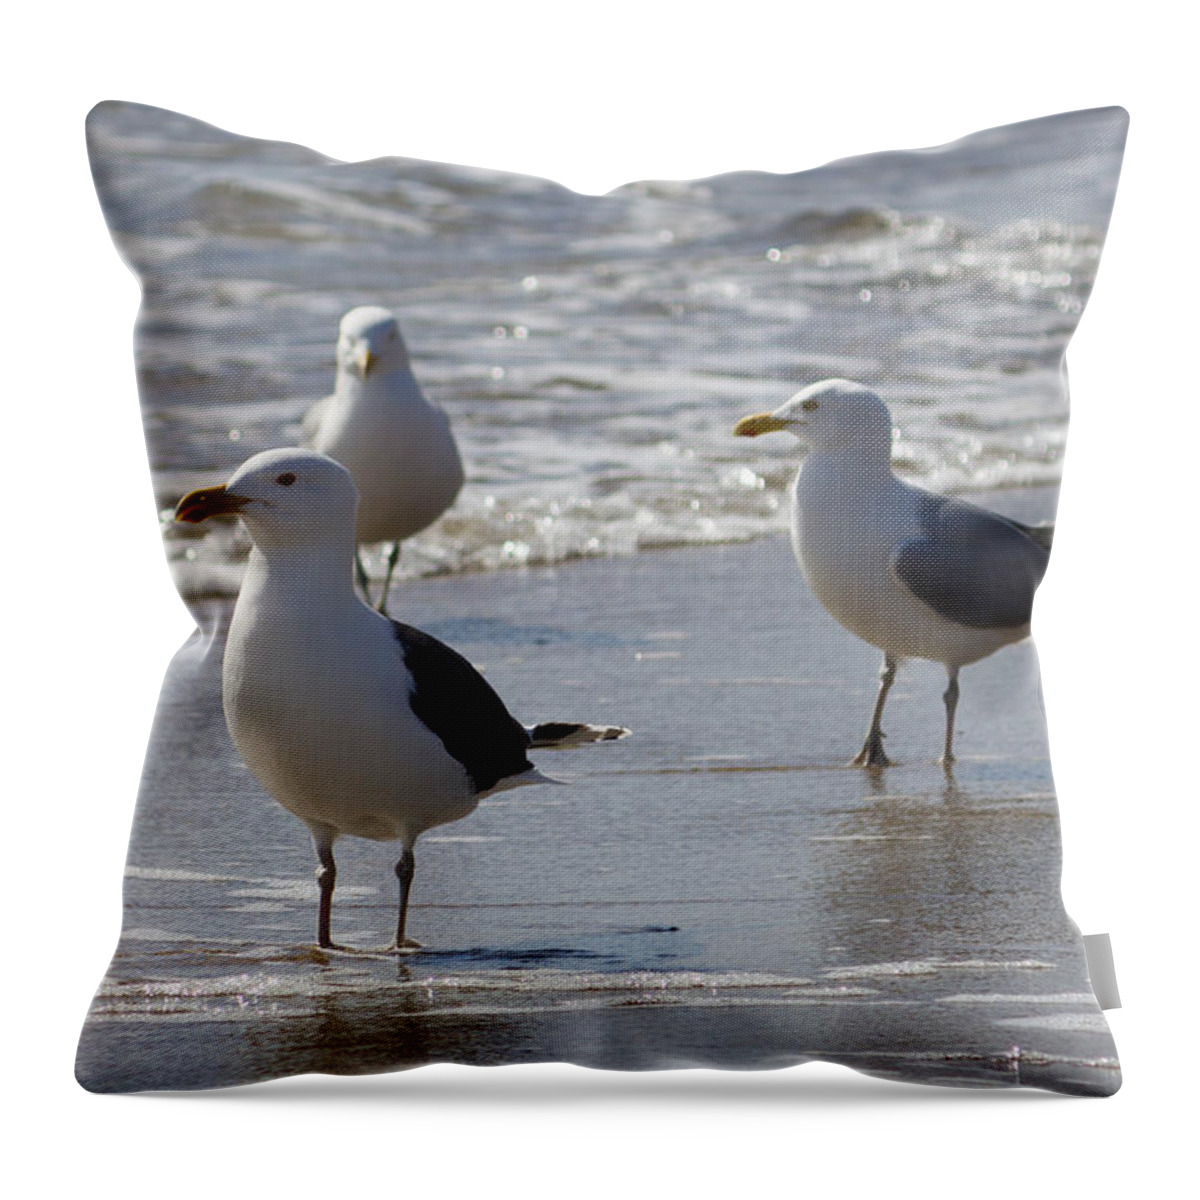 Seagulls Throw Pillow featuring the photograph Three Of a Kind - Seagulls by Kirkodd Photography Of New England